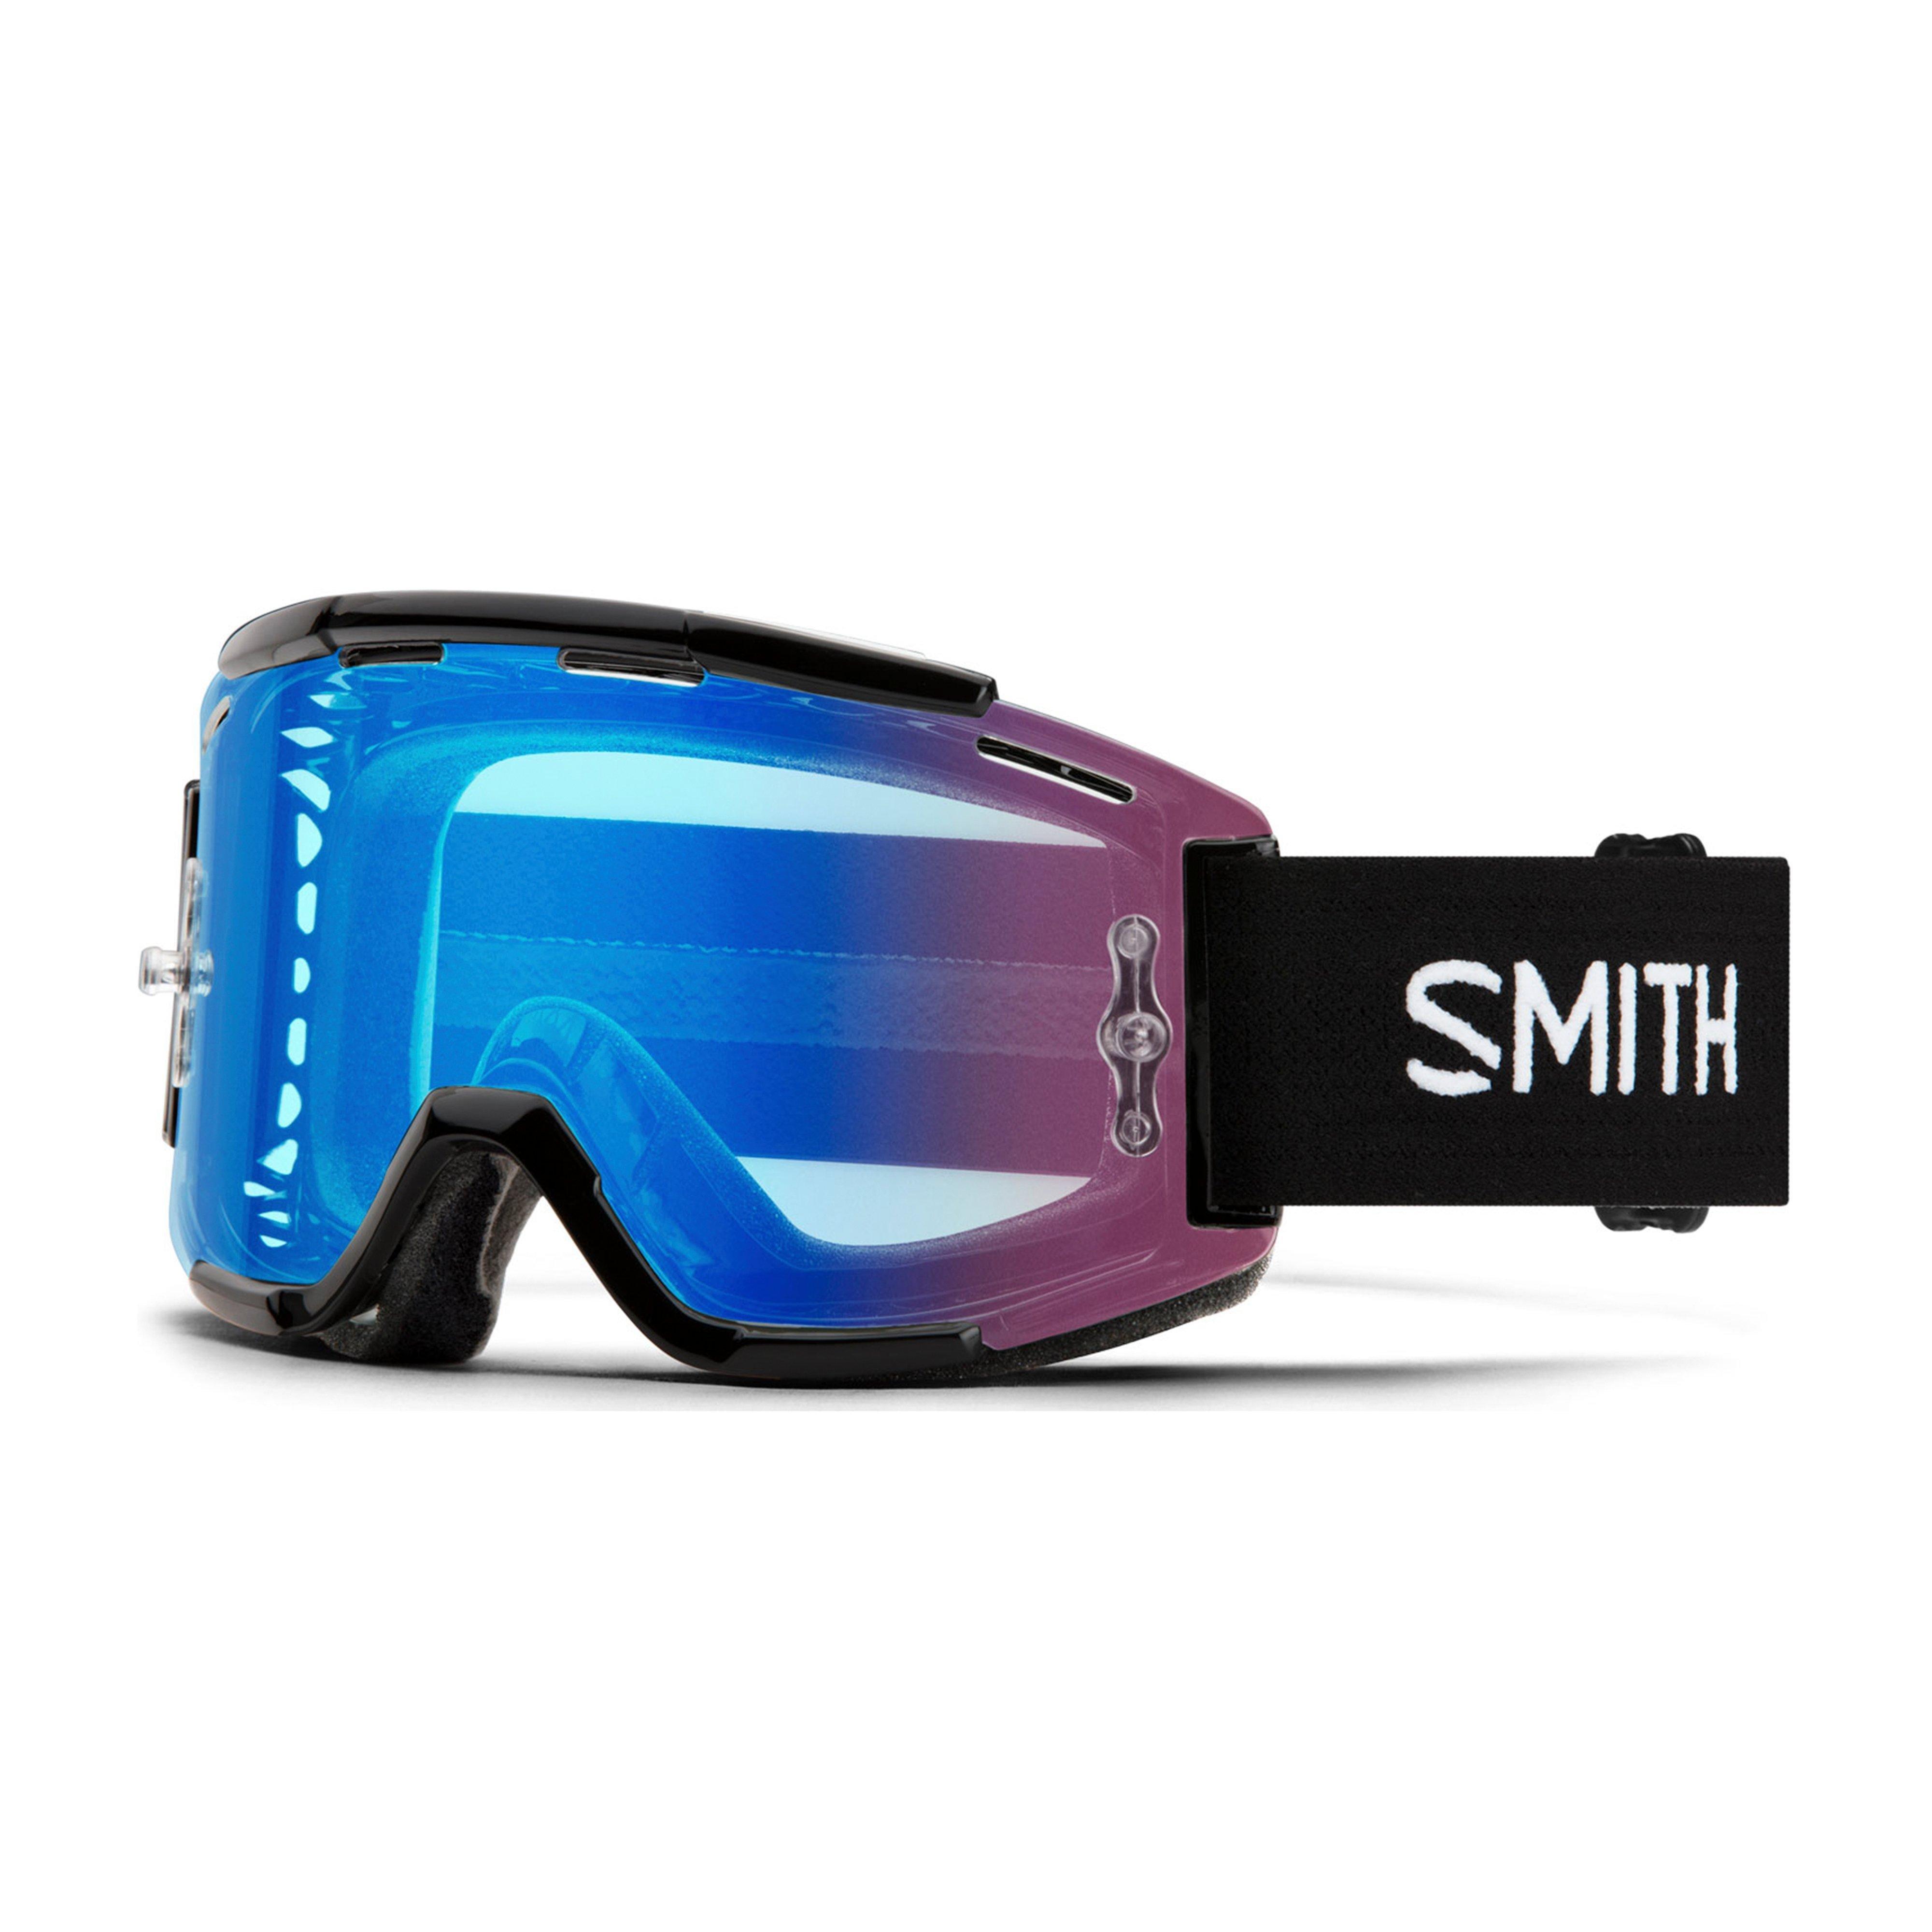 Smith Squad MTB Goggles Review